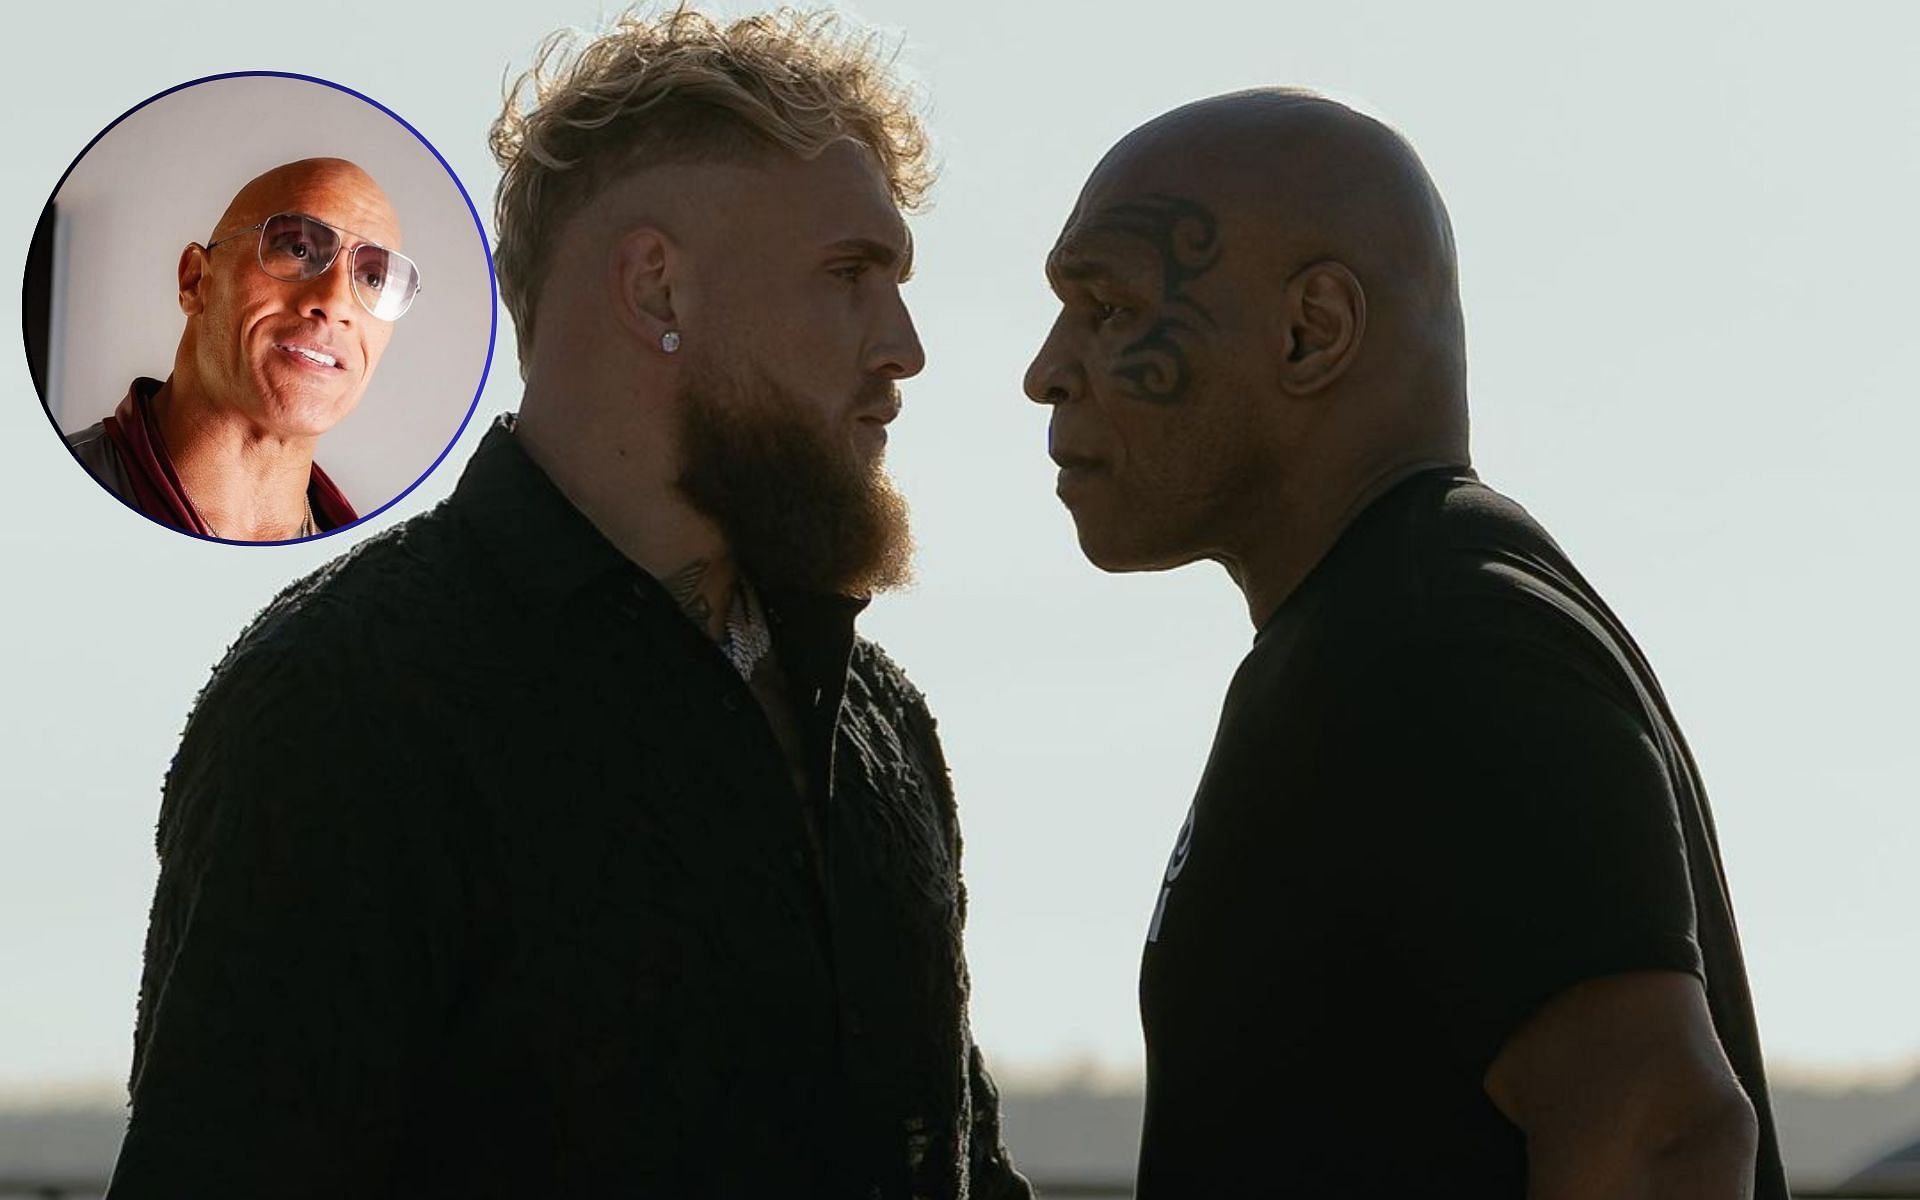 Dwayne Johnson drops hint about strategy talk with Jake Paul ahead of fight against Mike Tyson